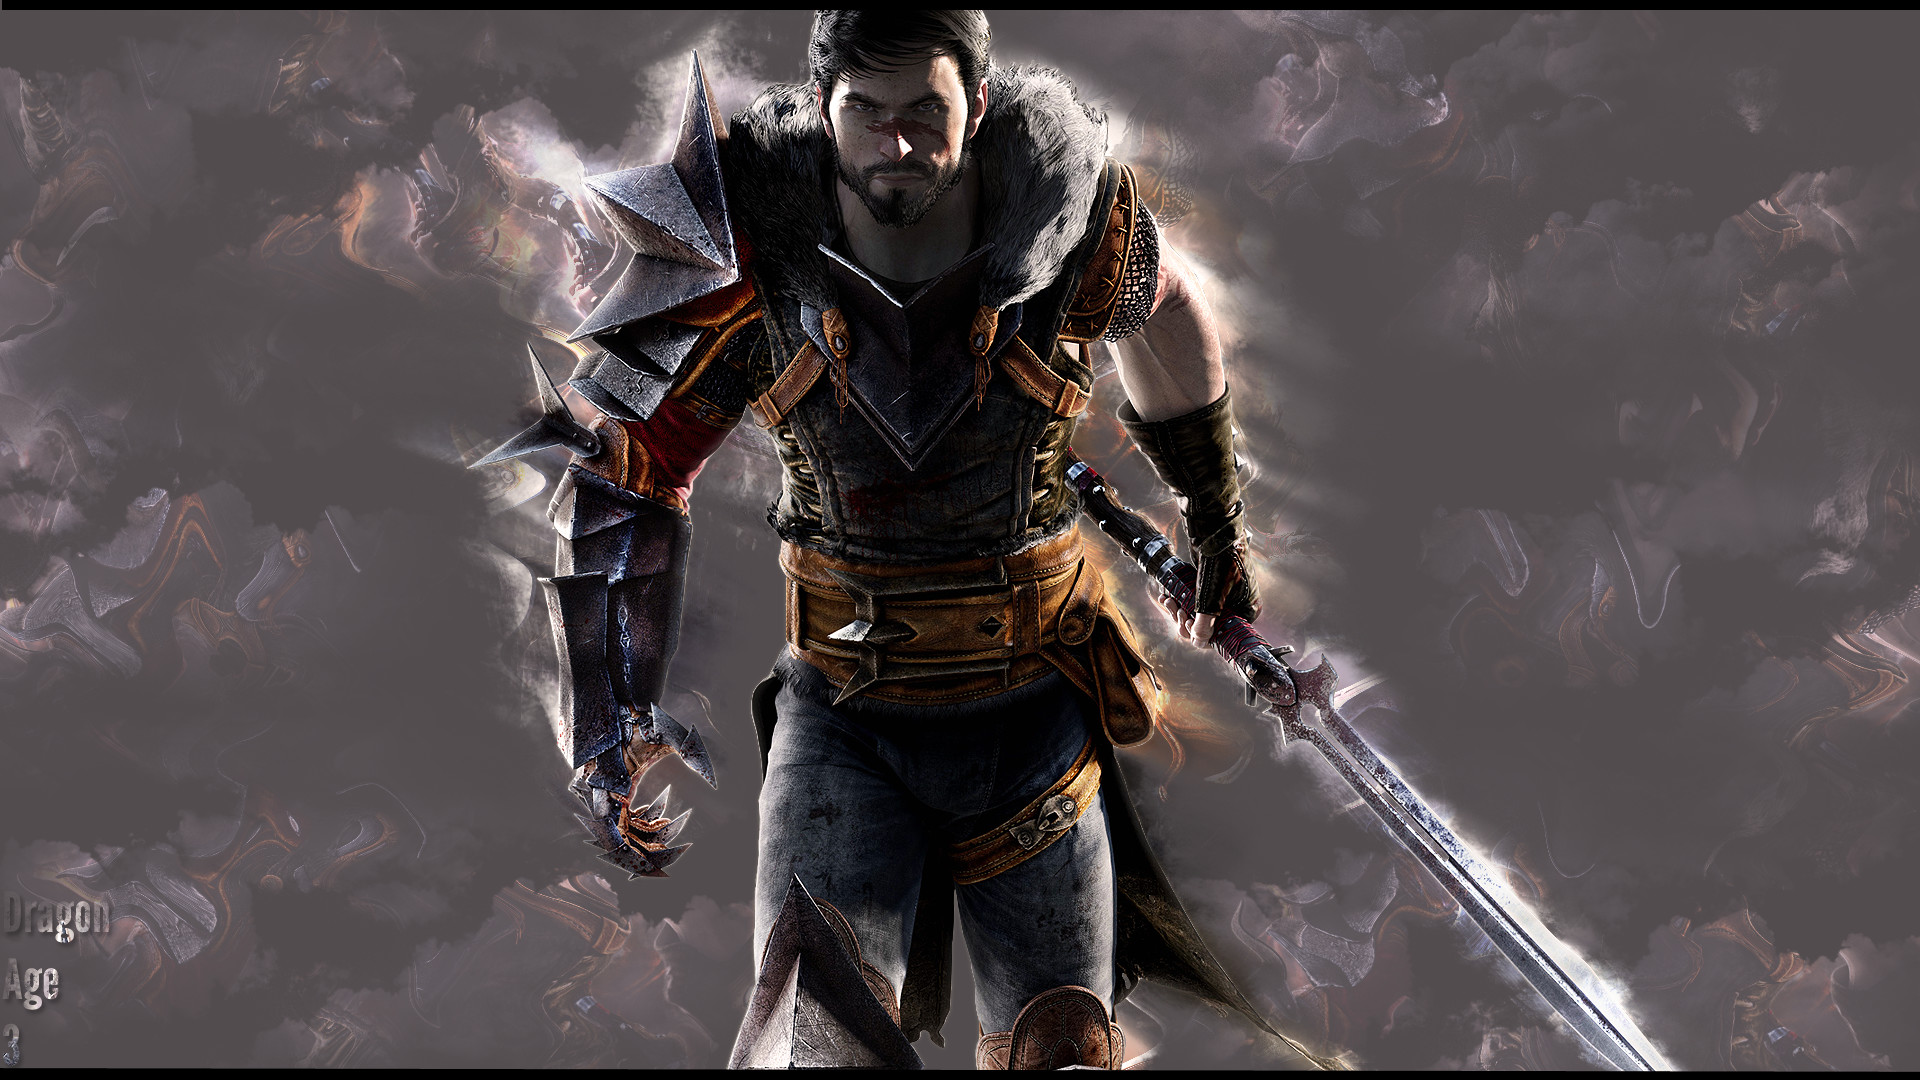 1920x1080 Dragon Age 3 Wallpaper by Tooyp Dragon Age 3 Wallpaper by Tooyp